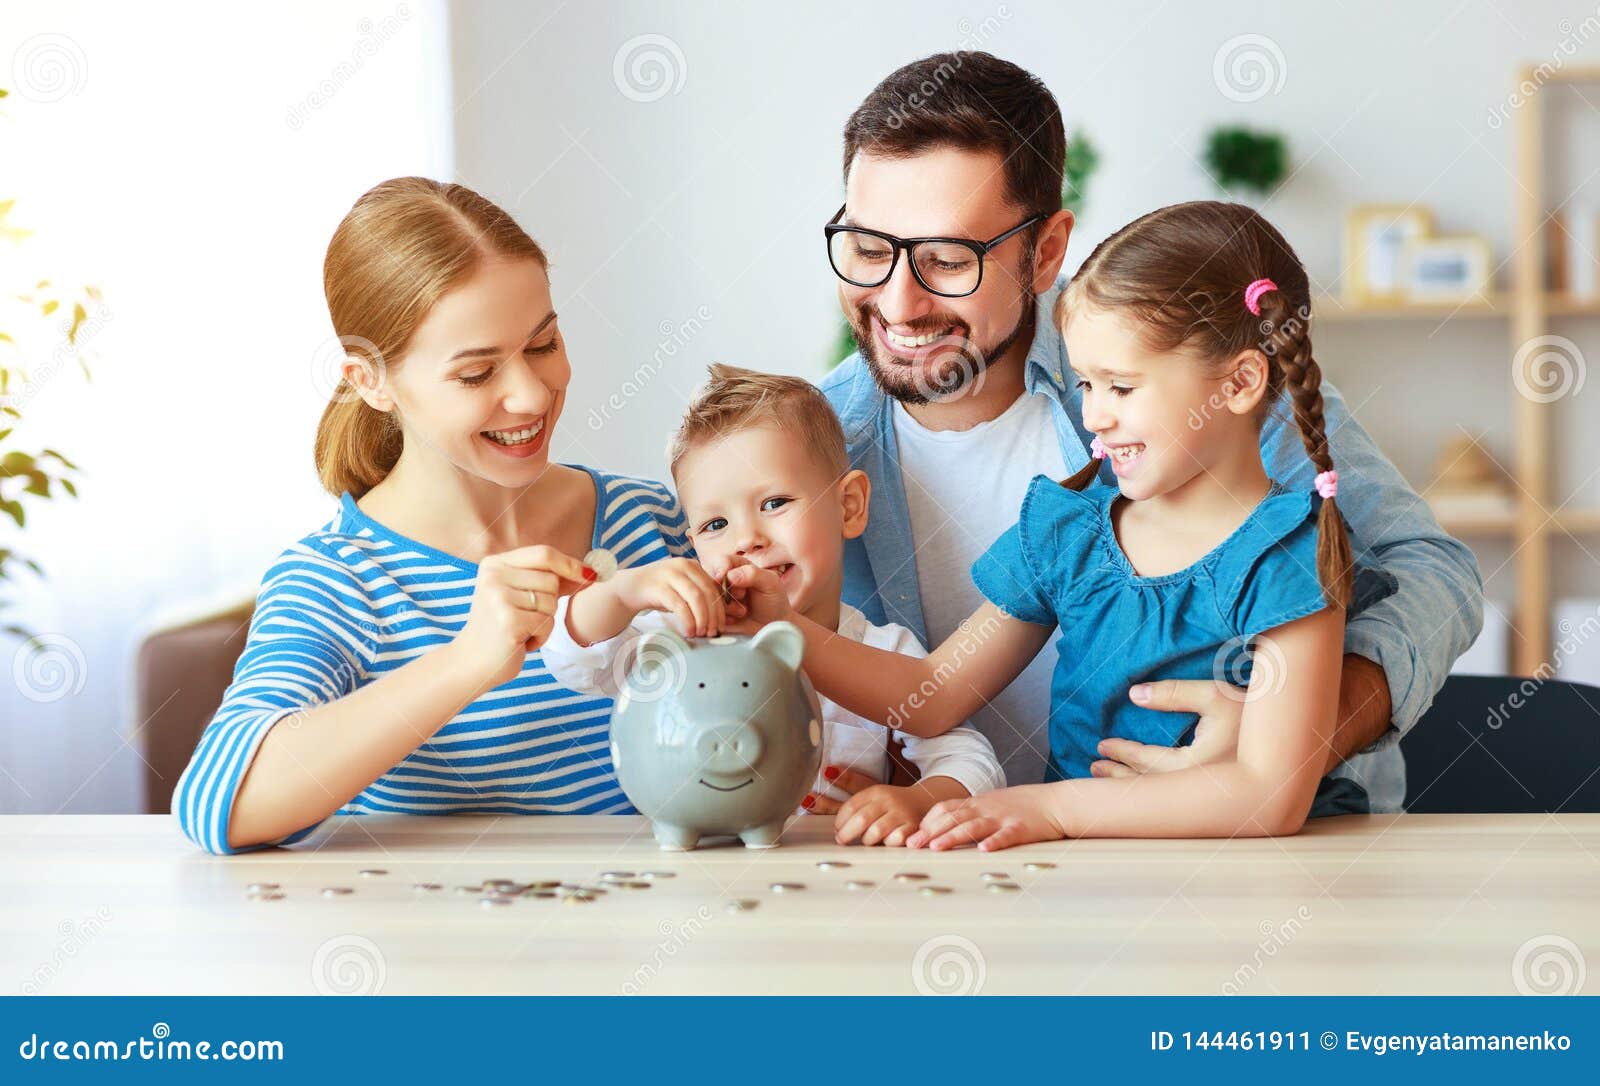 financial planning   family mother father and children with piggy bank at home